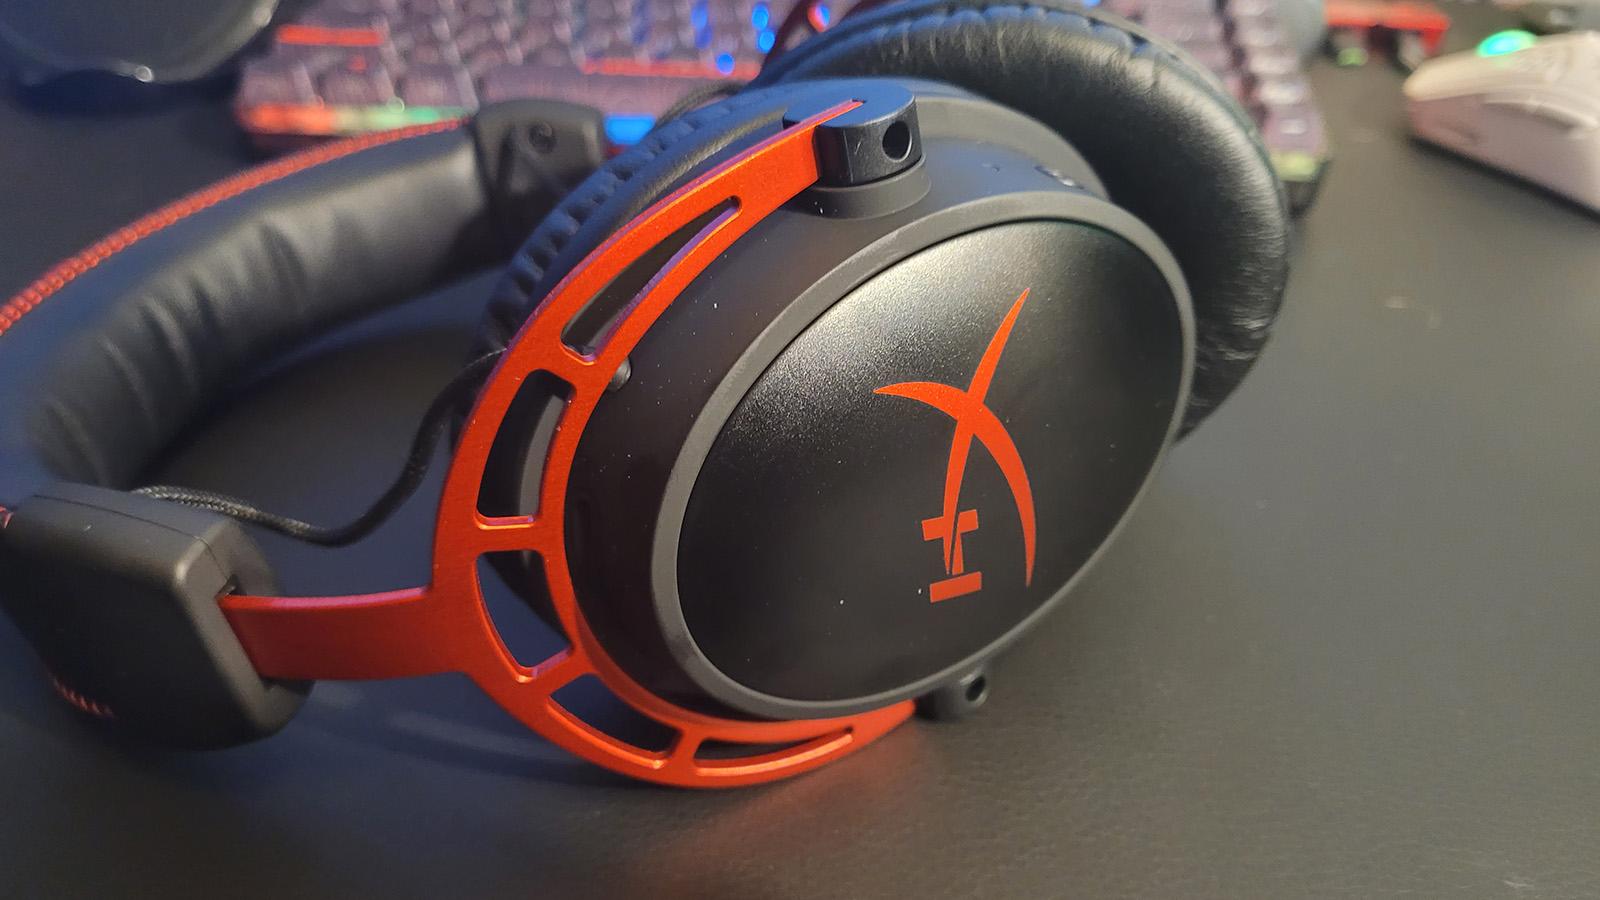 Get this HyperX gaming headset for only $17 — over half off MSRP